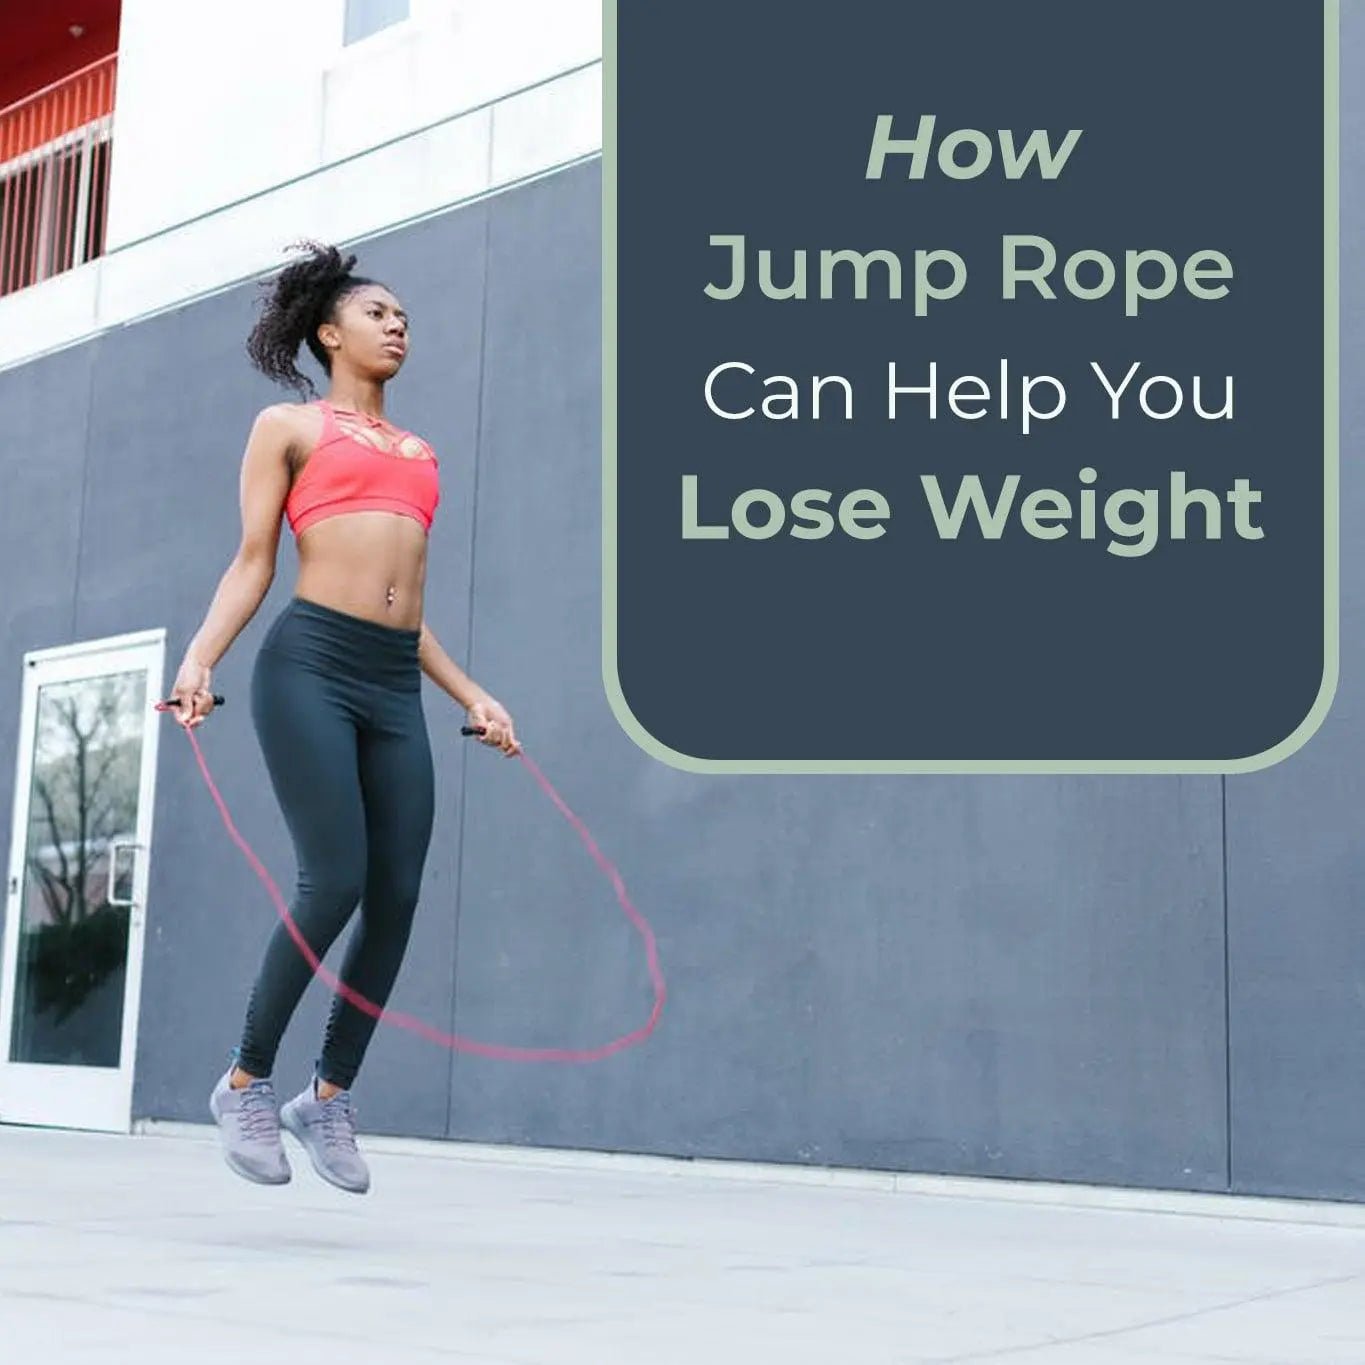 How Jump Rope Can Help You Lose Weight – Elite Jumps